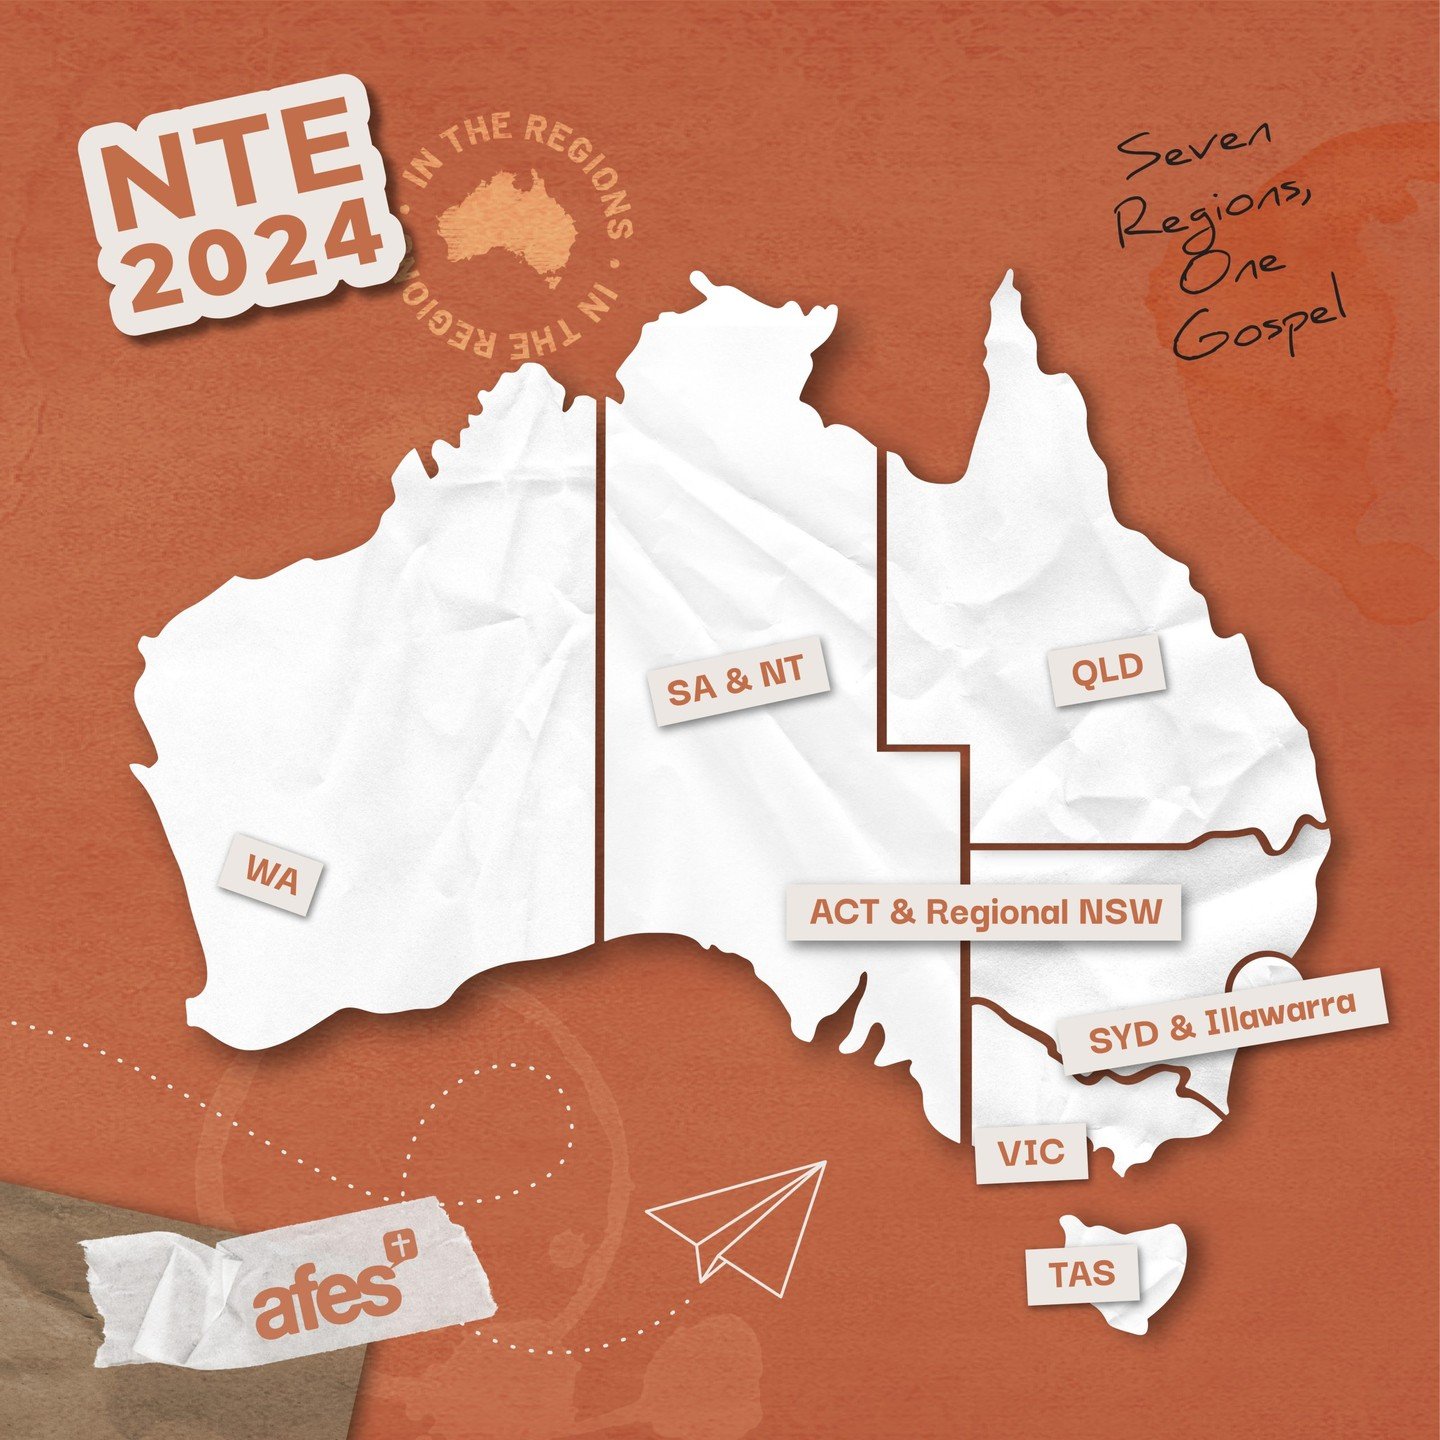 📣 NTE2024 will be in the regions! This means the National Training Event will happen at 7 different regions across Australia. Stay tuned for more info! 🥳🙌 #NTE2024 #IntheRegions #getkeen #Australia